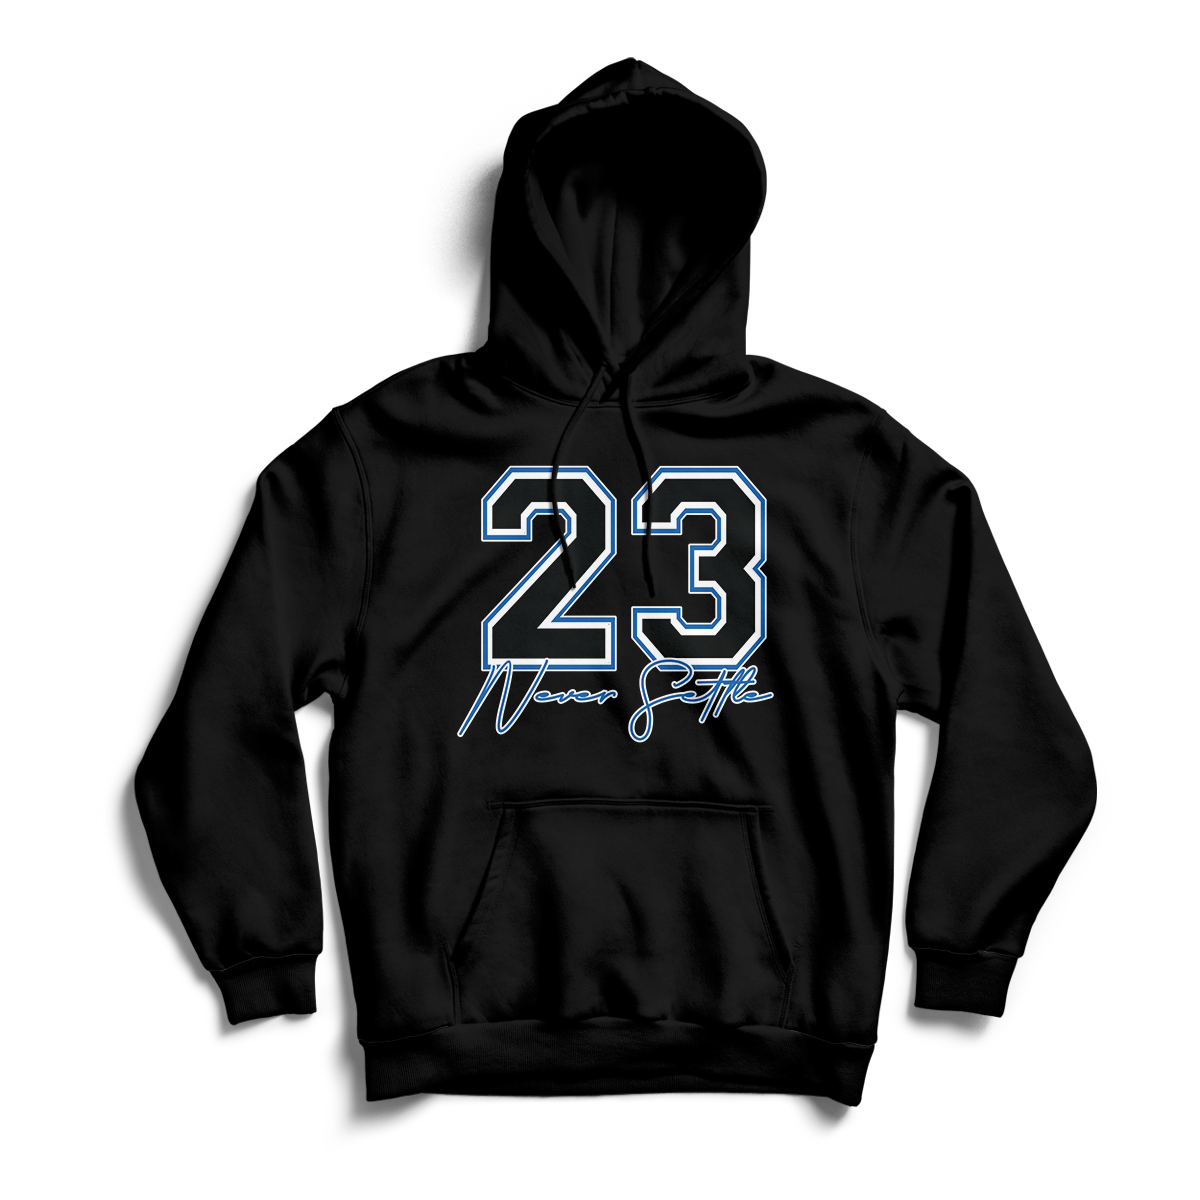 'Never Settle' in Game Royal CW Unisex Pullover Hoodie